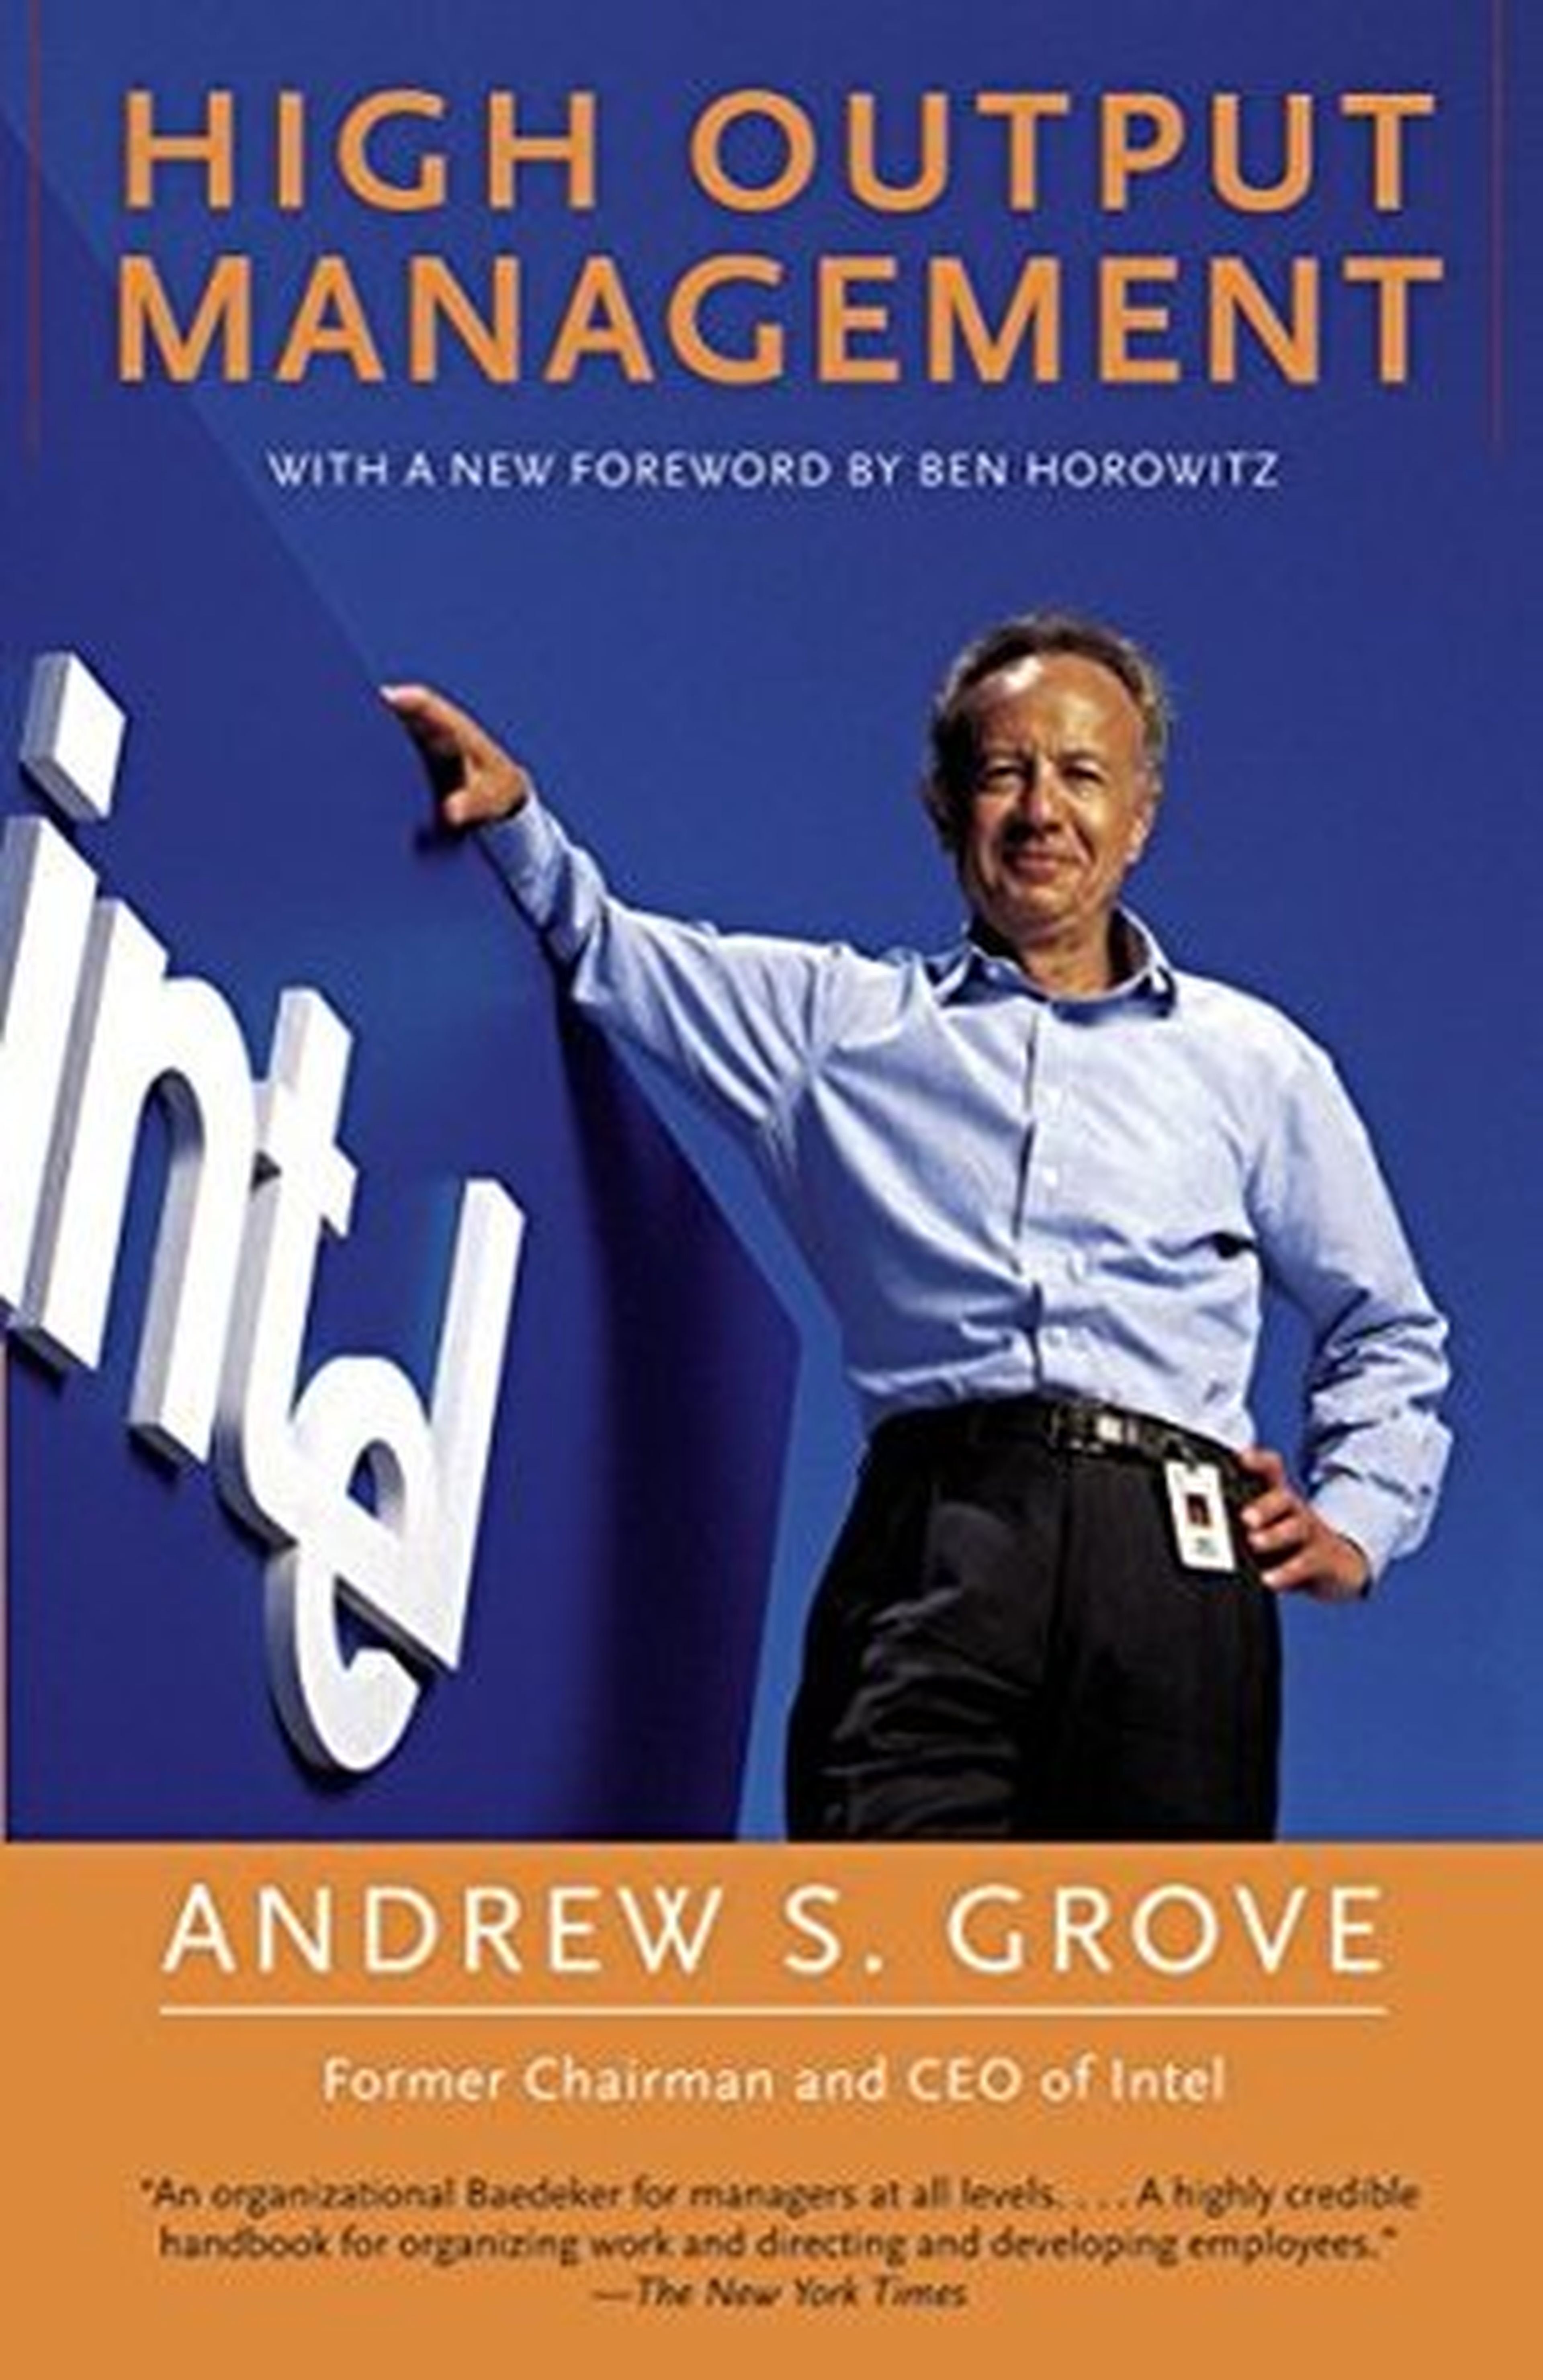 "High Output Management" - Andrew S. Grove